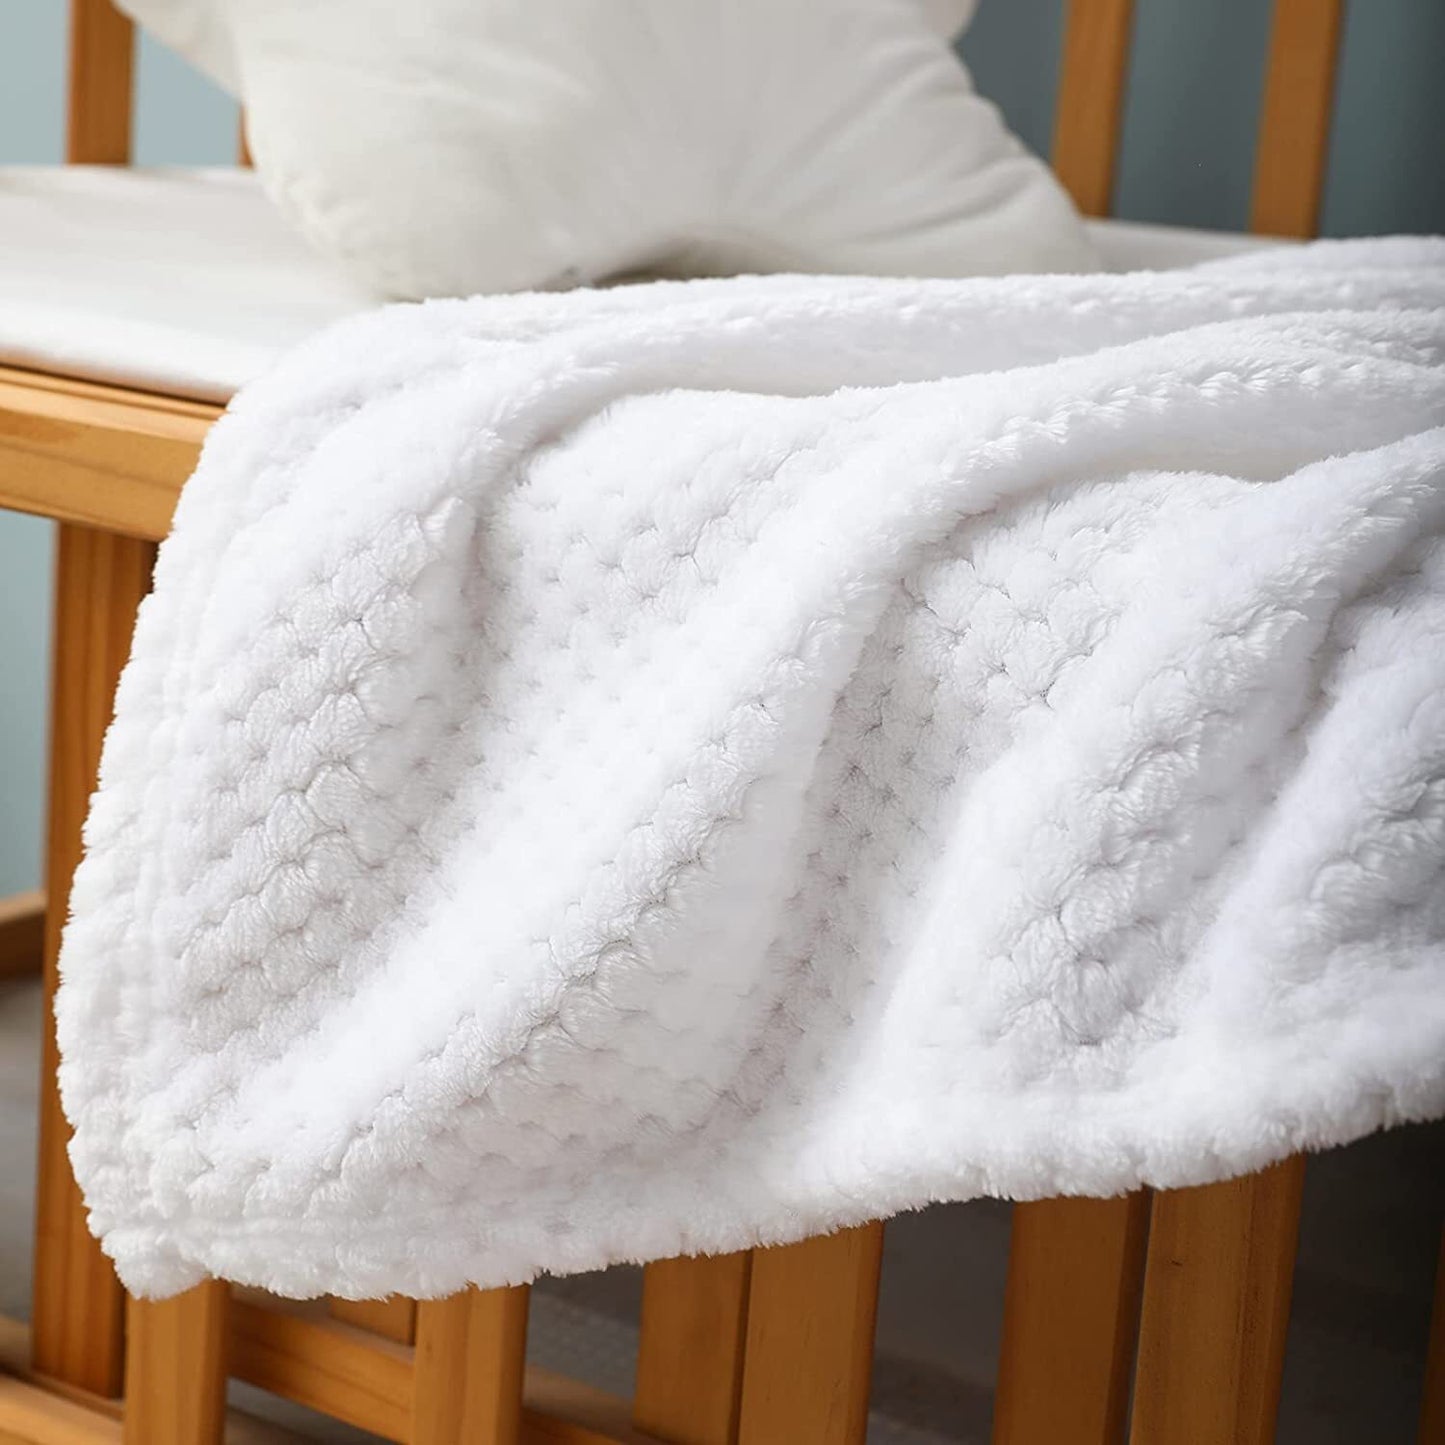 Exclusivo Mezcla Waffle Textured Fleece Baby Blanket, Soft and Warm Swaddle Blanket, Infant, Newborn, Toddler and Kids Receiving Blankets for Crib Stroller (Off White, 40x50 inches)